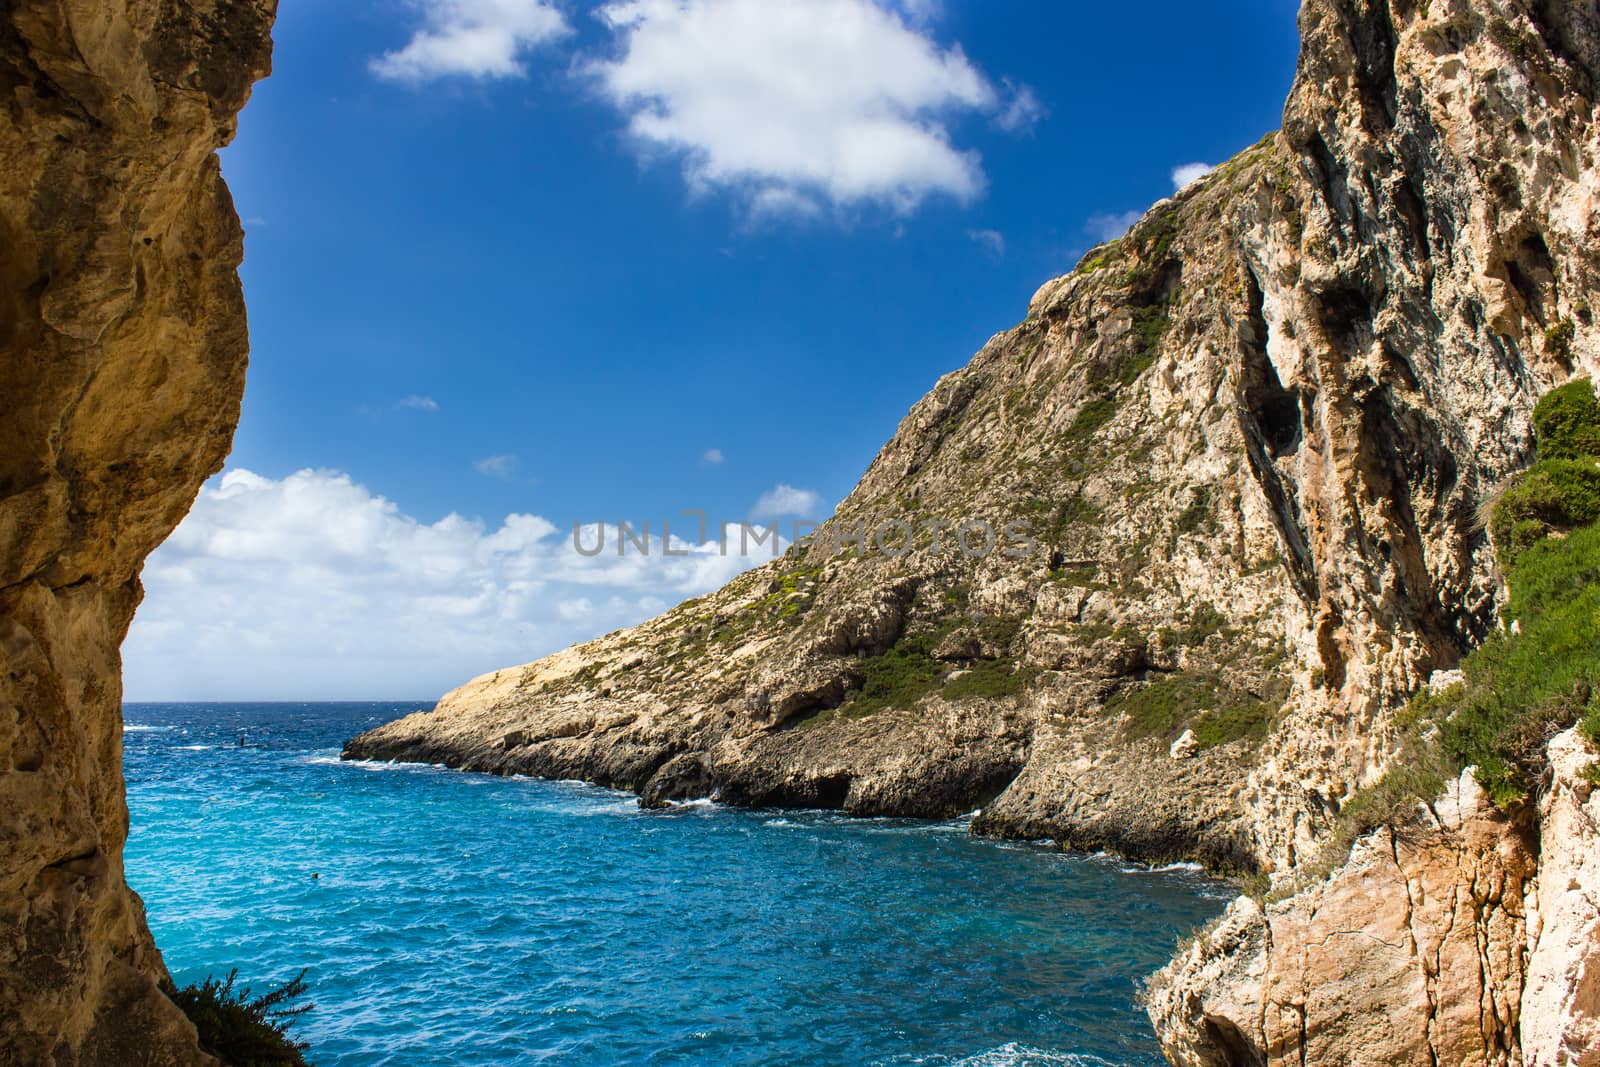 blue sea of the island of Gozo in Malta by goghy73